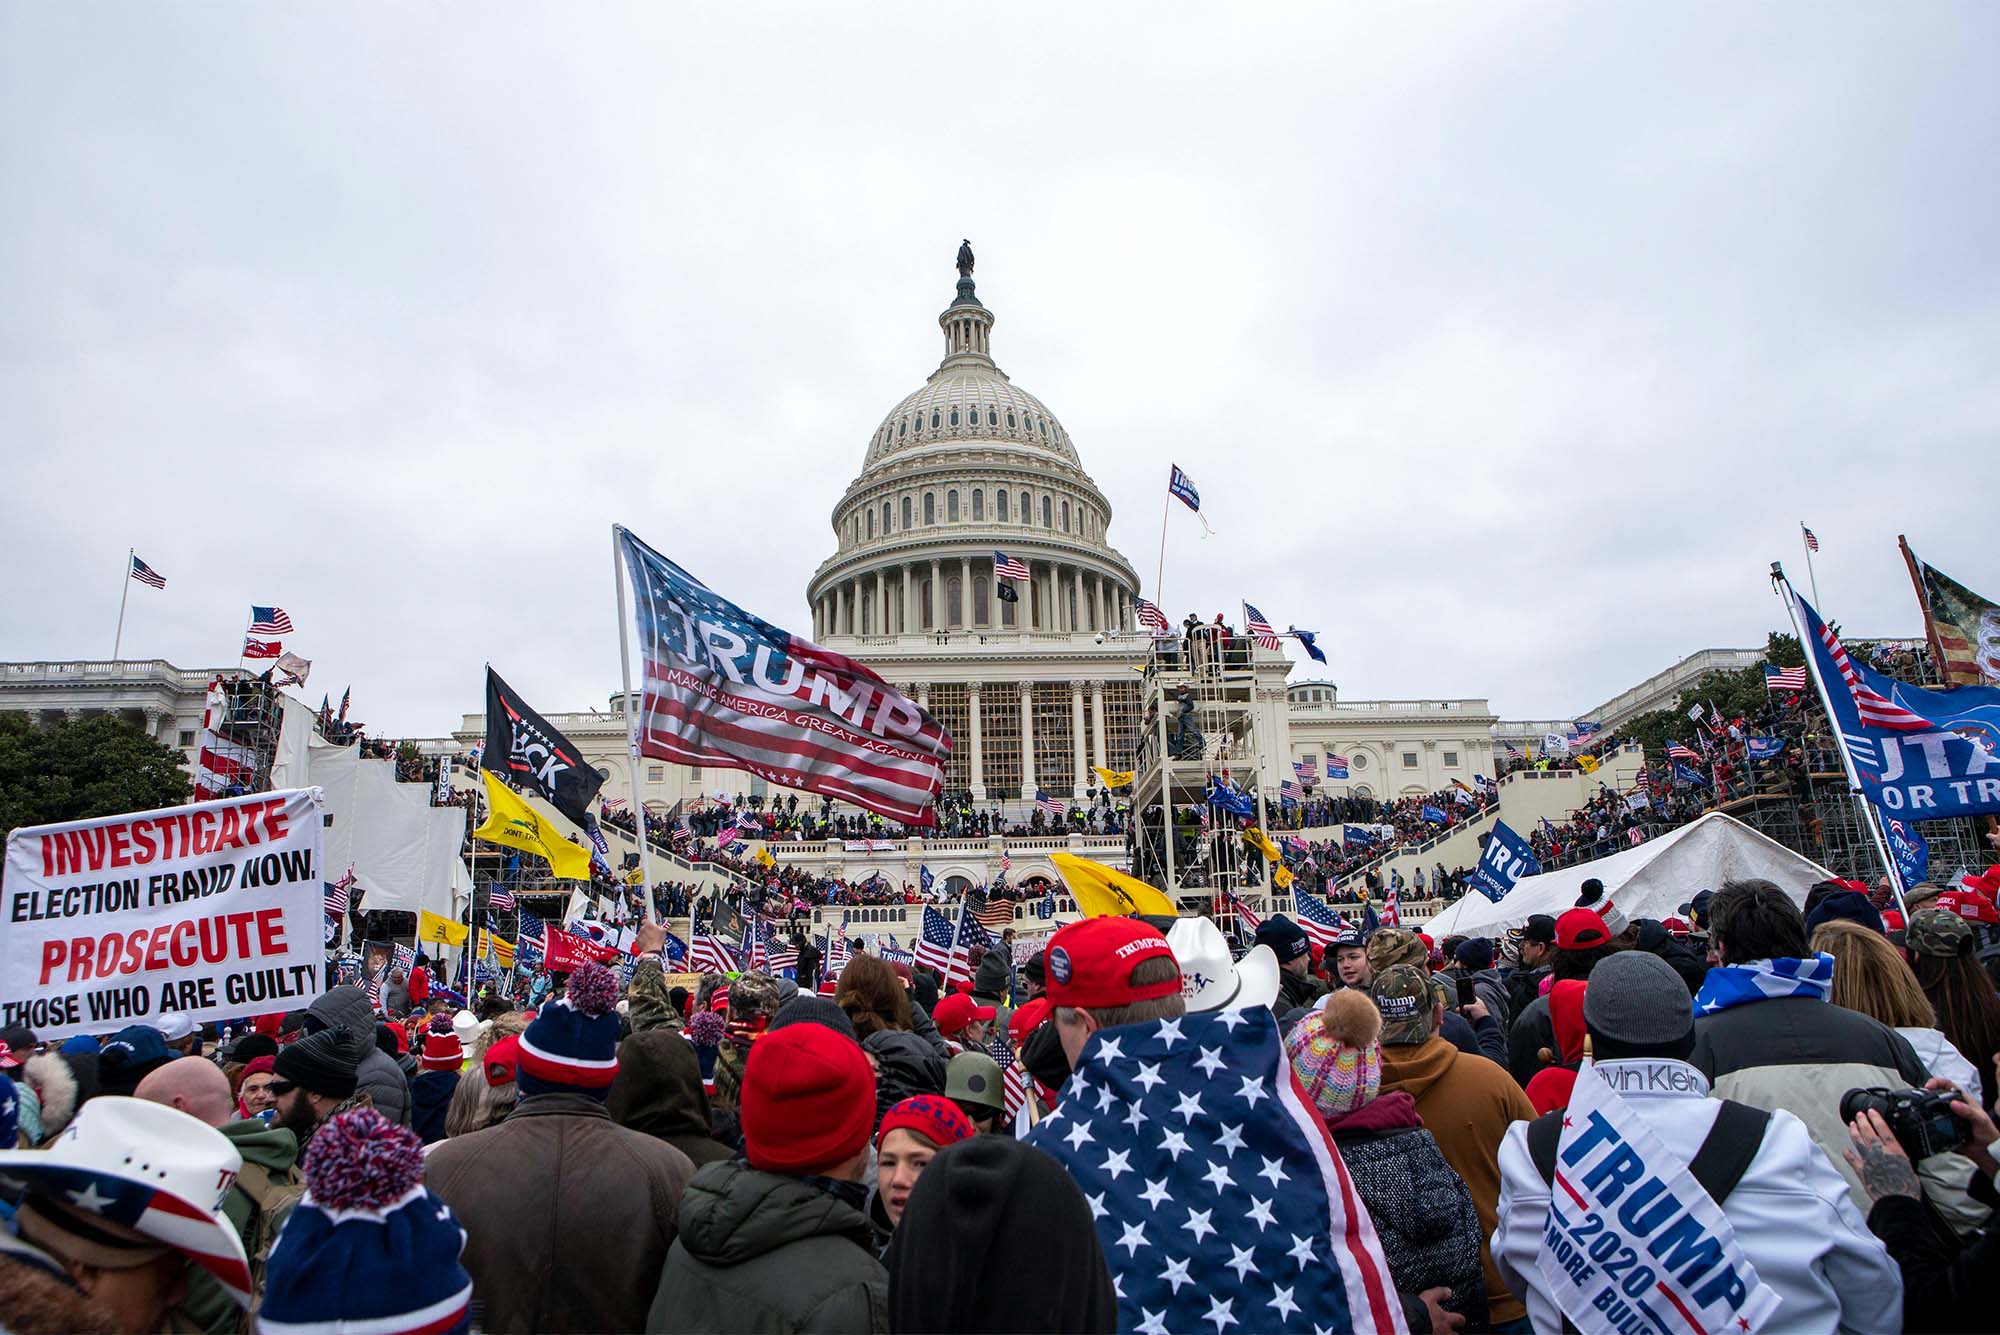 Protestors in front of the US Capitol in Washington DC on January 6th, 2021